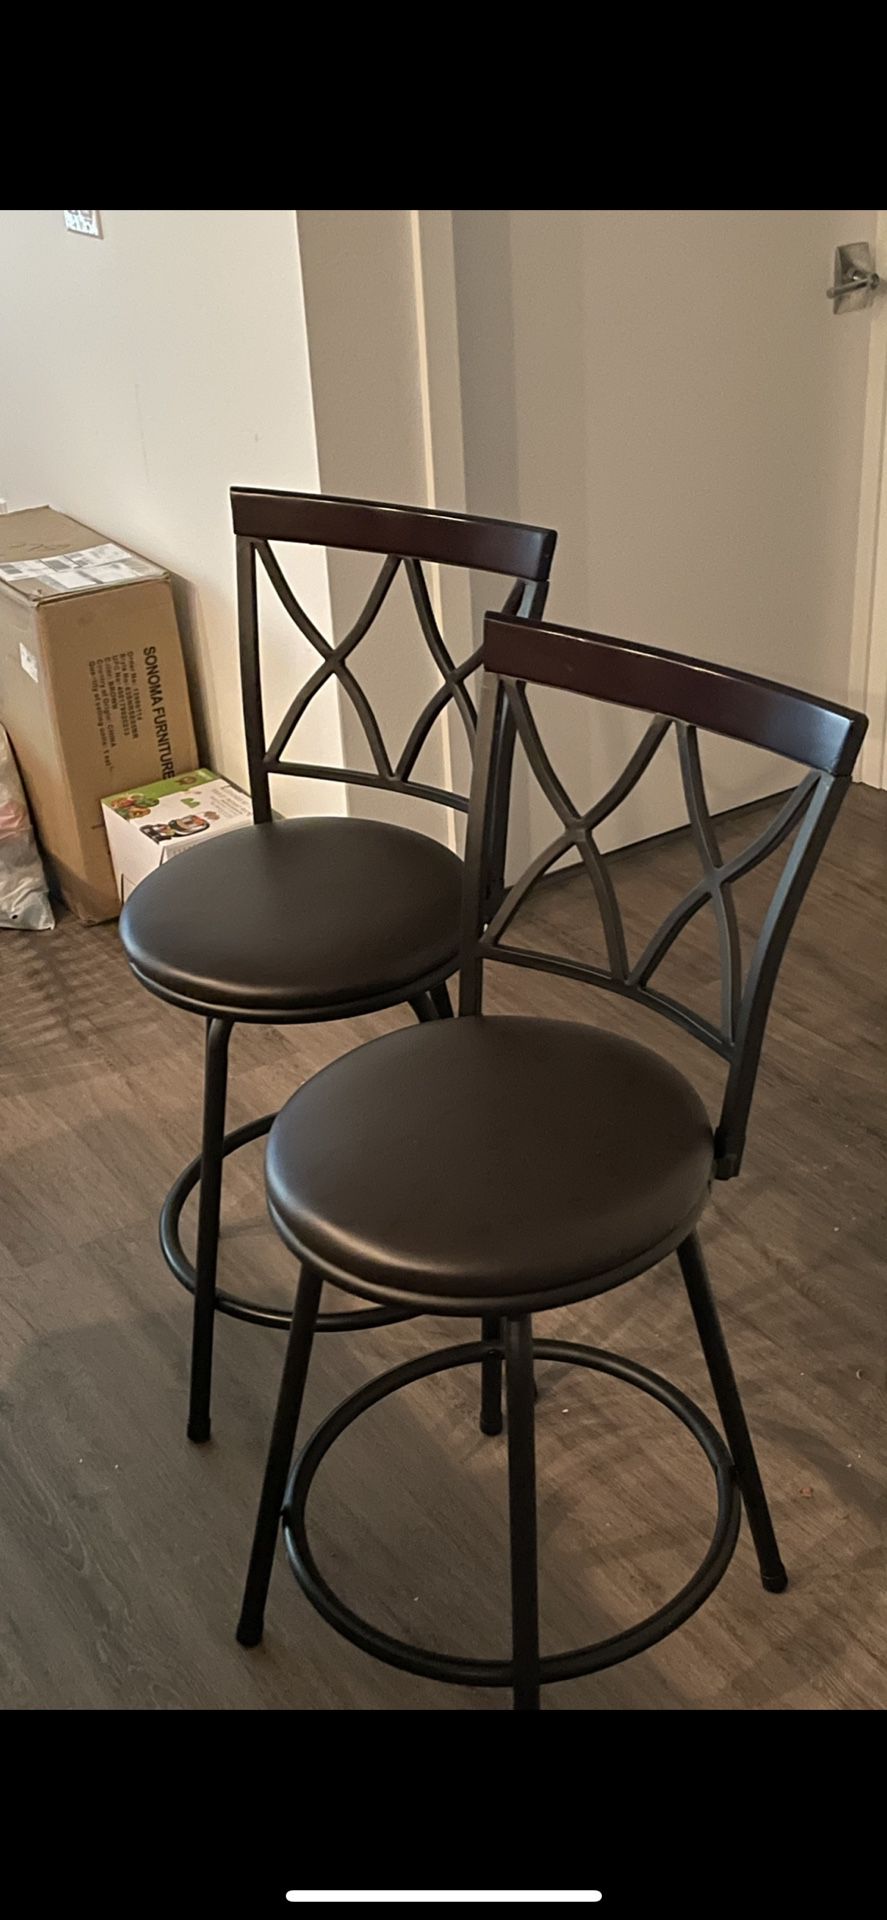 Bar Stools For Sale - New In Box, Unassembled